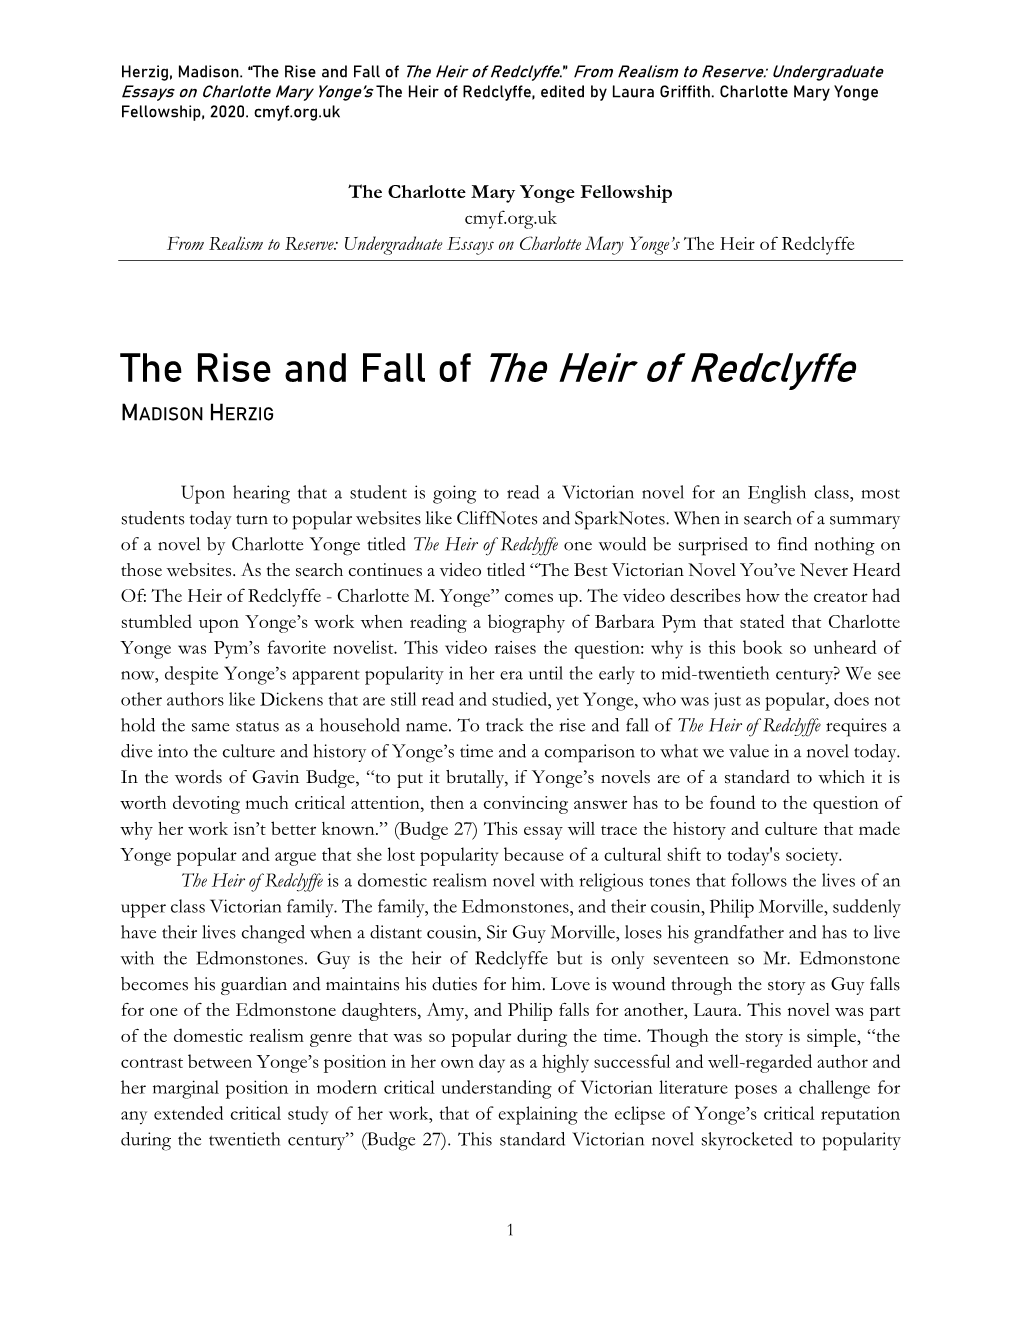 The Rise and Fall of the Heir of Redclyffe.” from Realism to Reserve: Undergraduate Essays on Charlotte Mary Yonge’S the Heir of Redclyffe, Edited by Laura Griffith